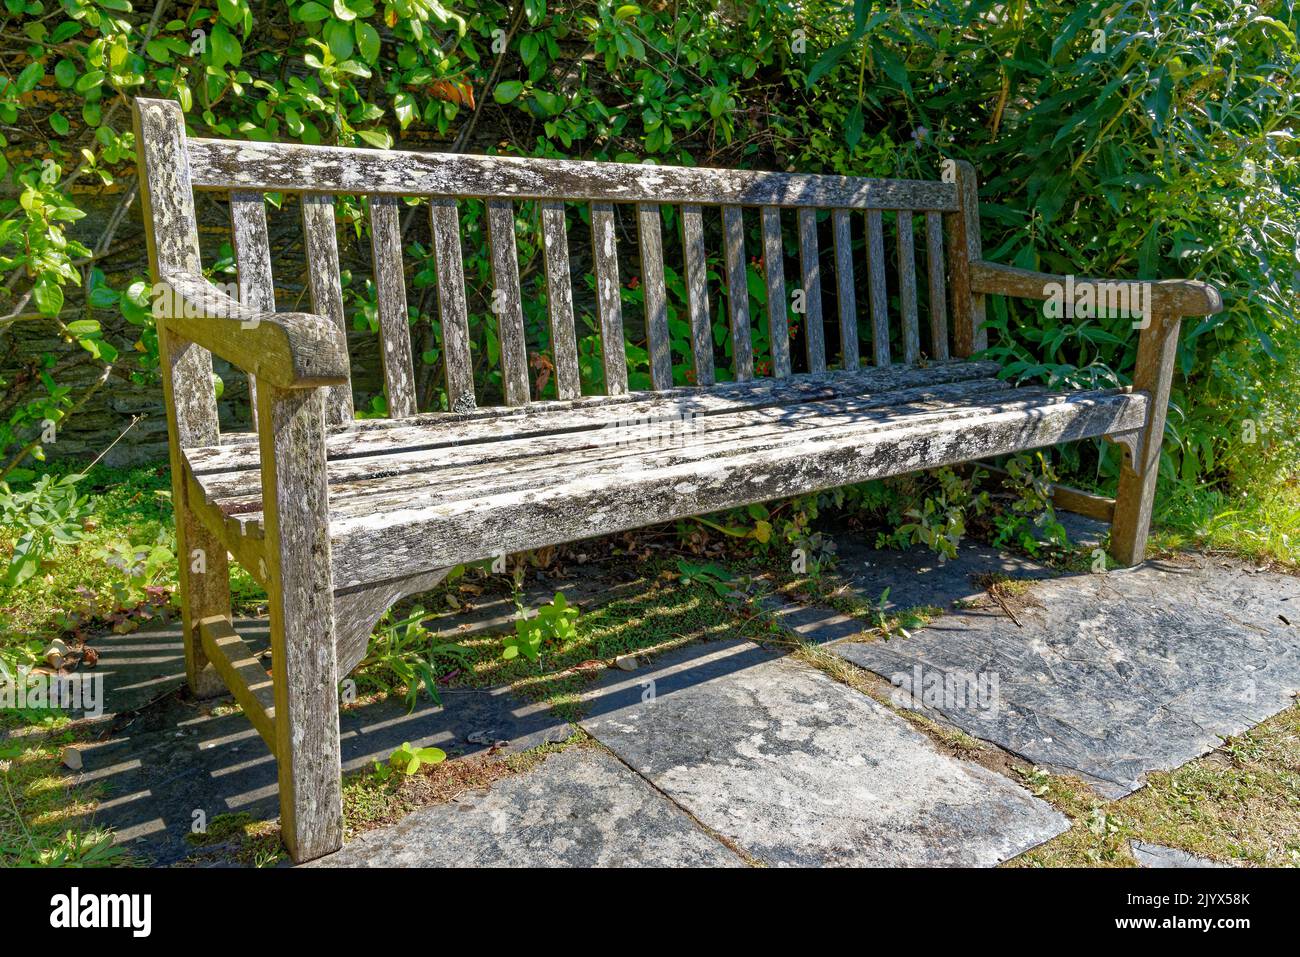 United Kingdom, South West England, Cornwall, Tintagel - The medieval hall-house of 14th century - Rustic wooden garden bench seat in the garden of Th Stock Photo